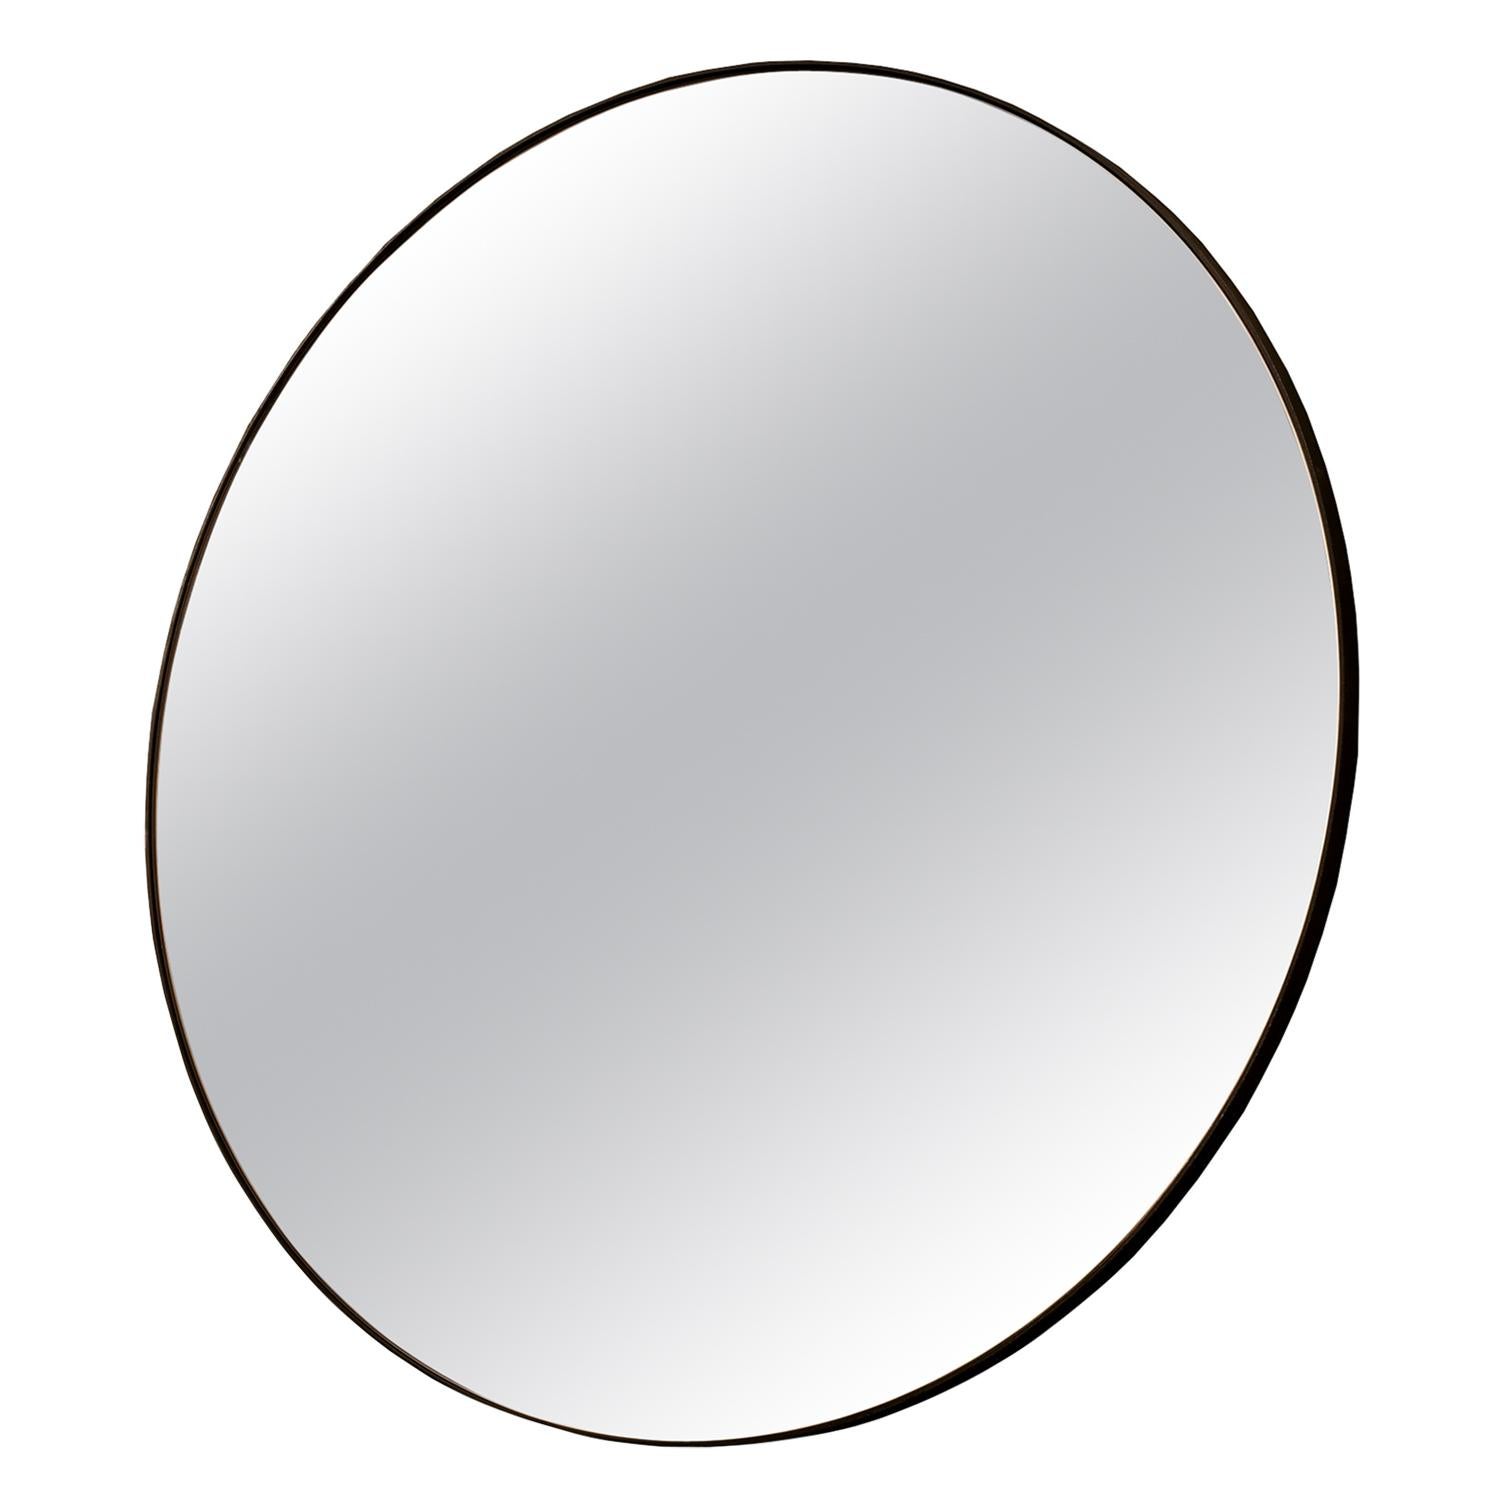 Circular Mirror Handcrafted and Signed by Novocastrian